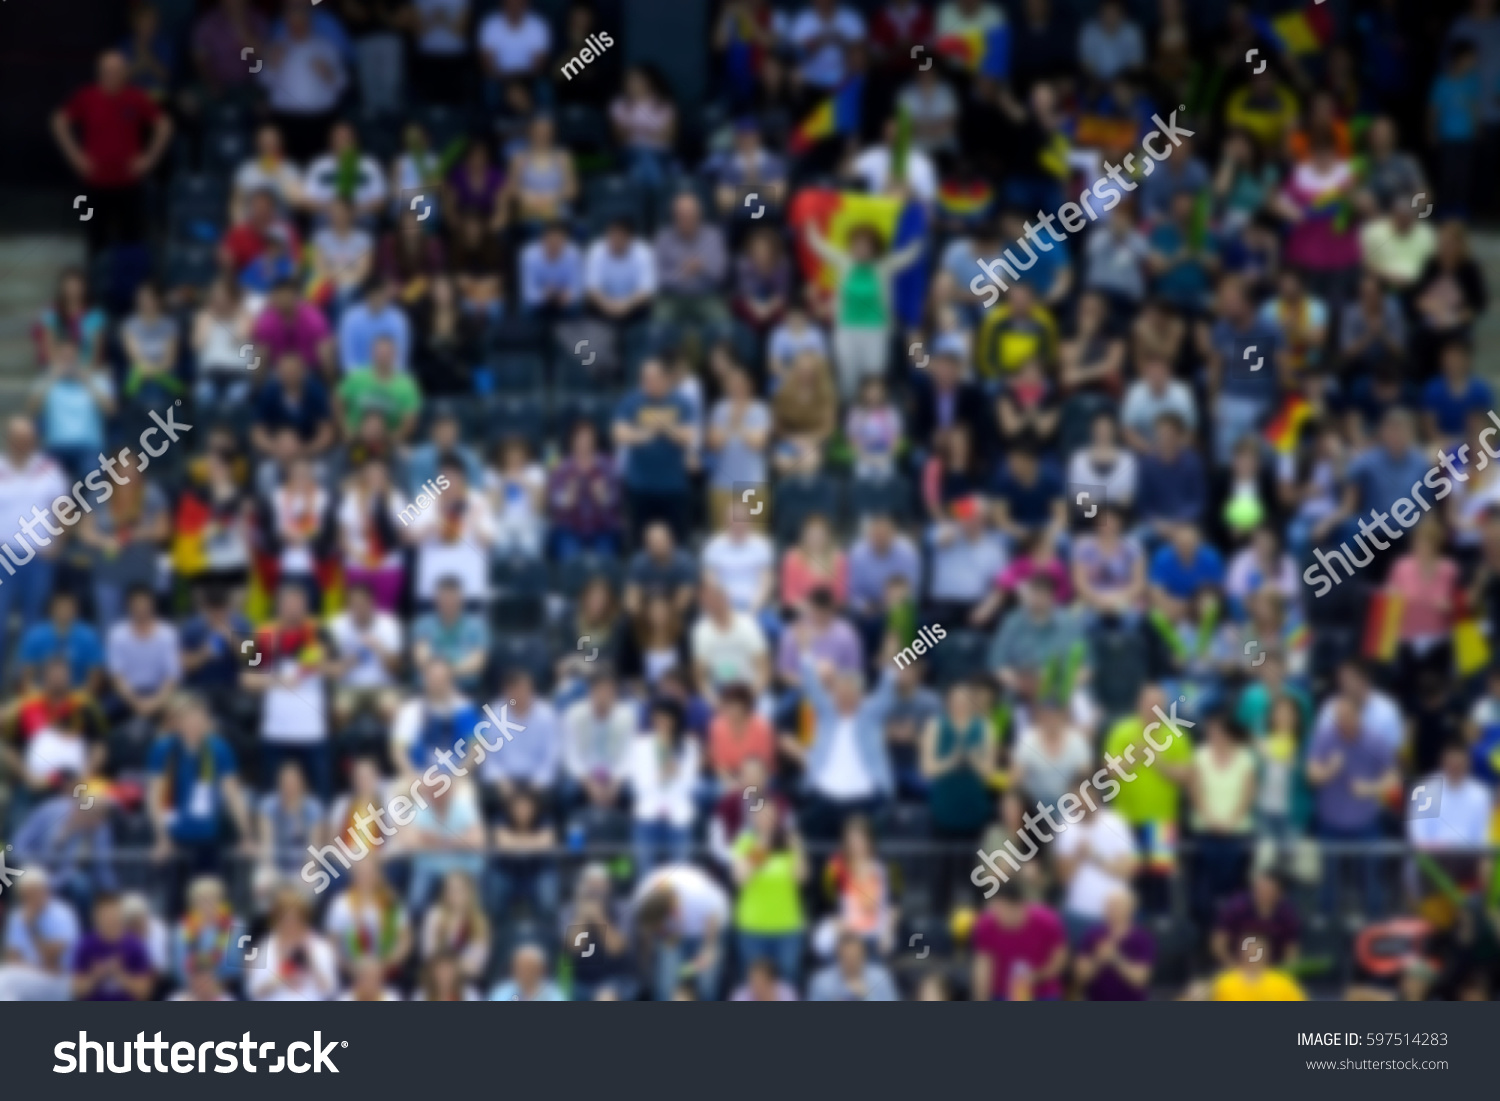 blurred background of crowd of people in a sports arena #597514283